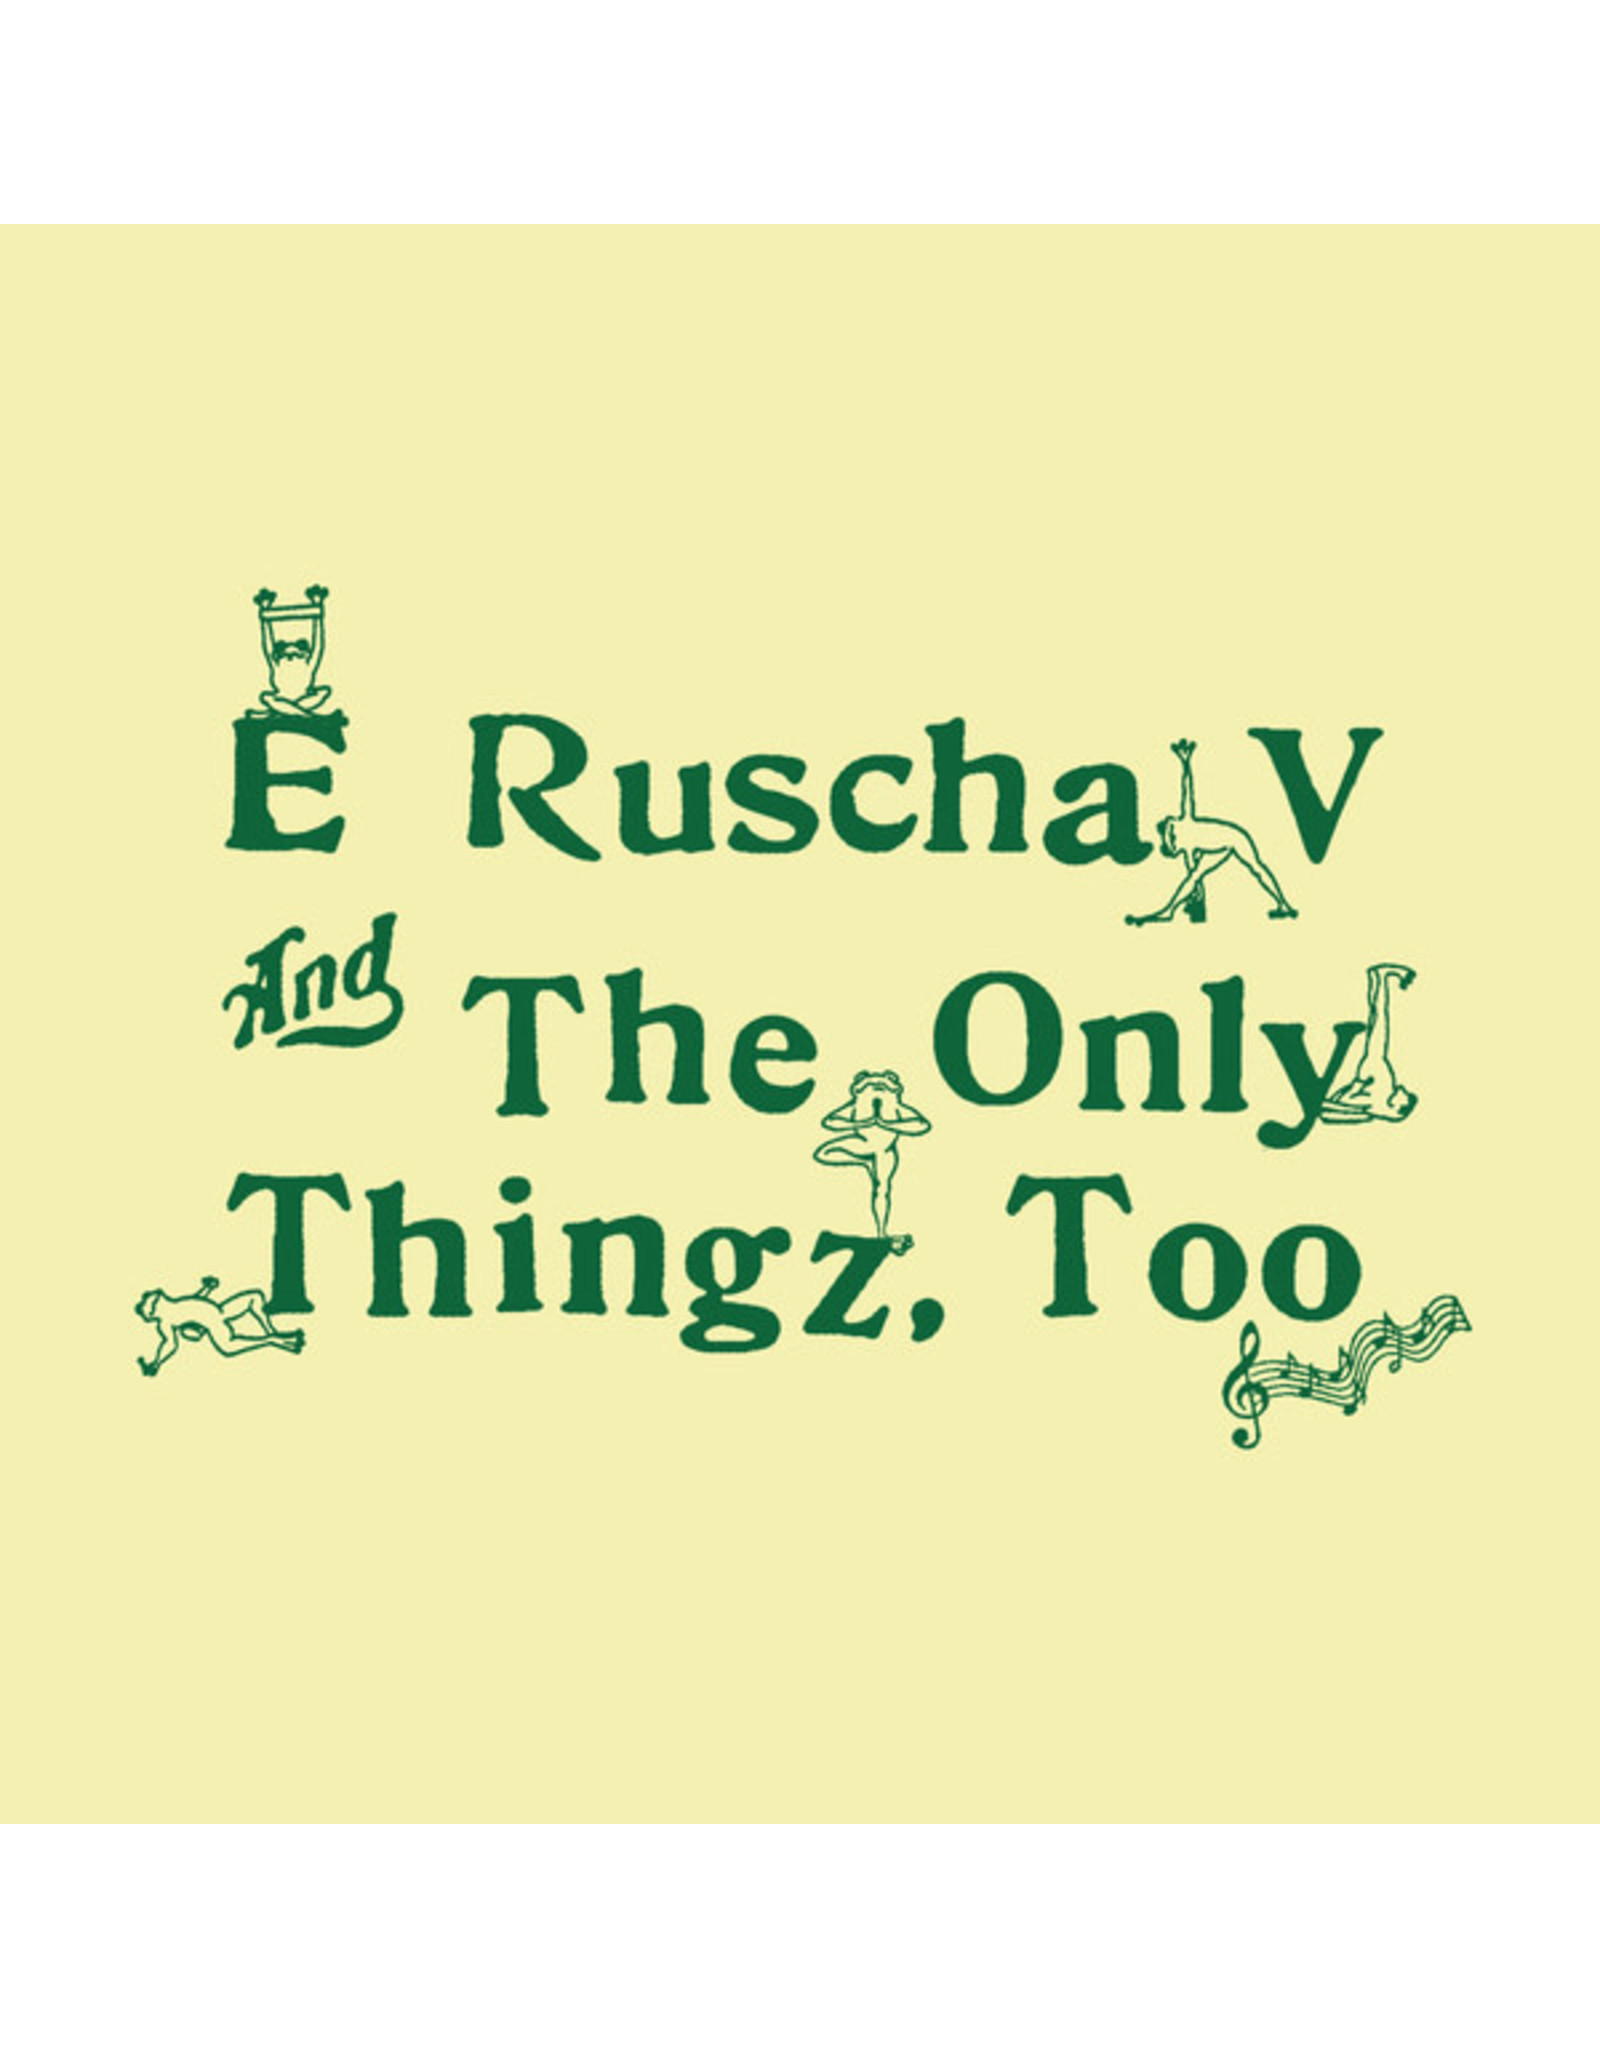 Good Morning Tapes Ruscha V, Ed & The Only Thingz: s/t LP